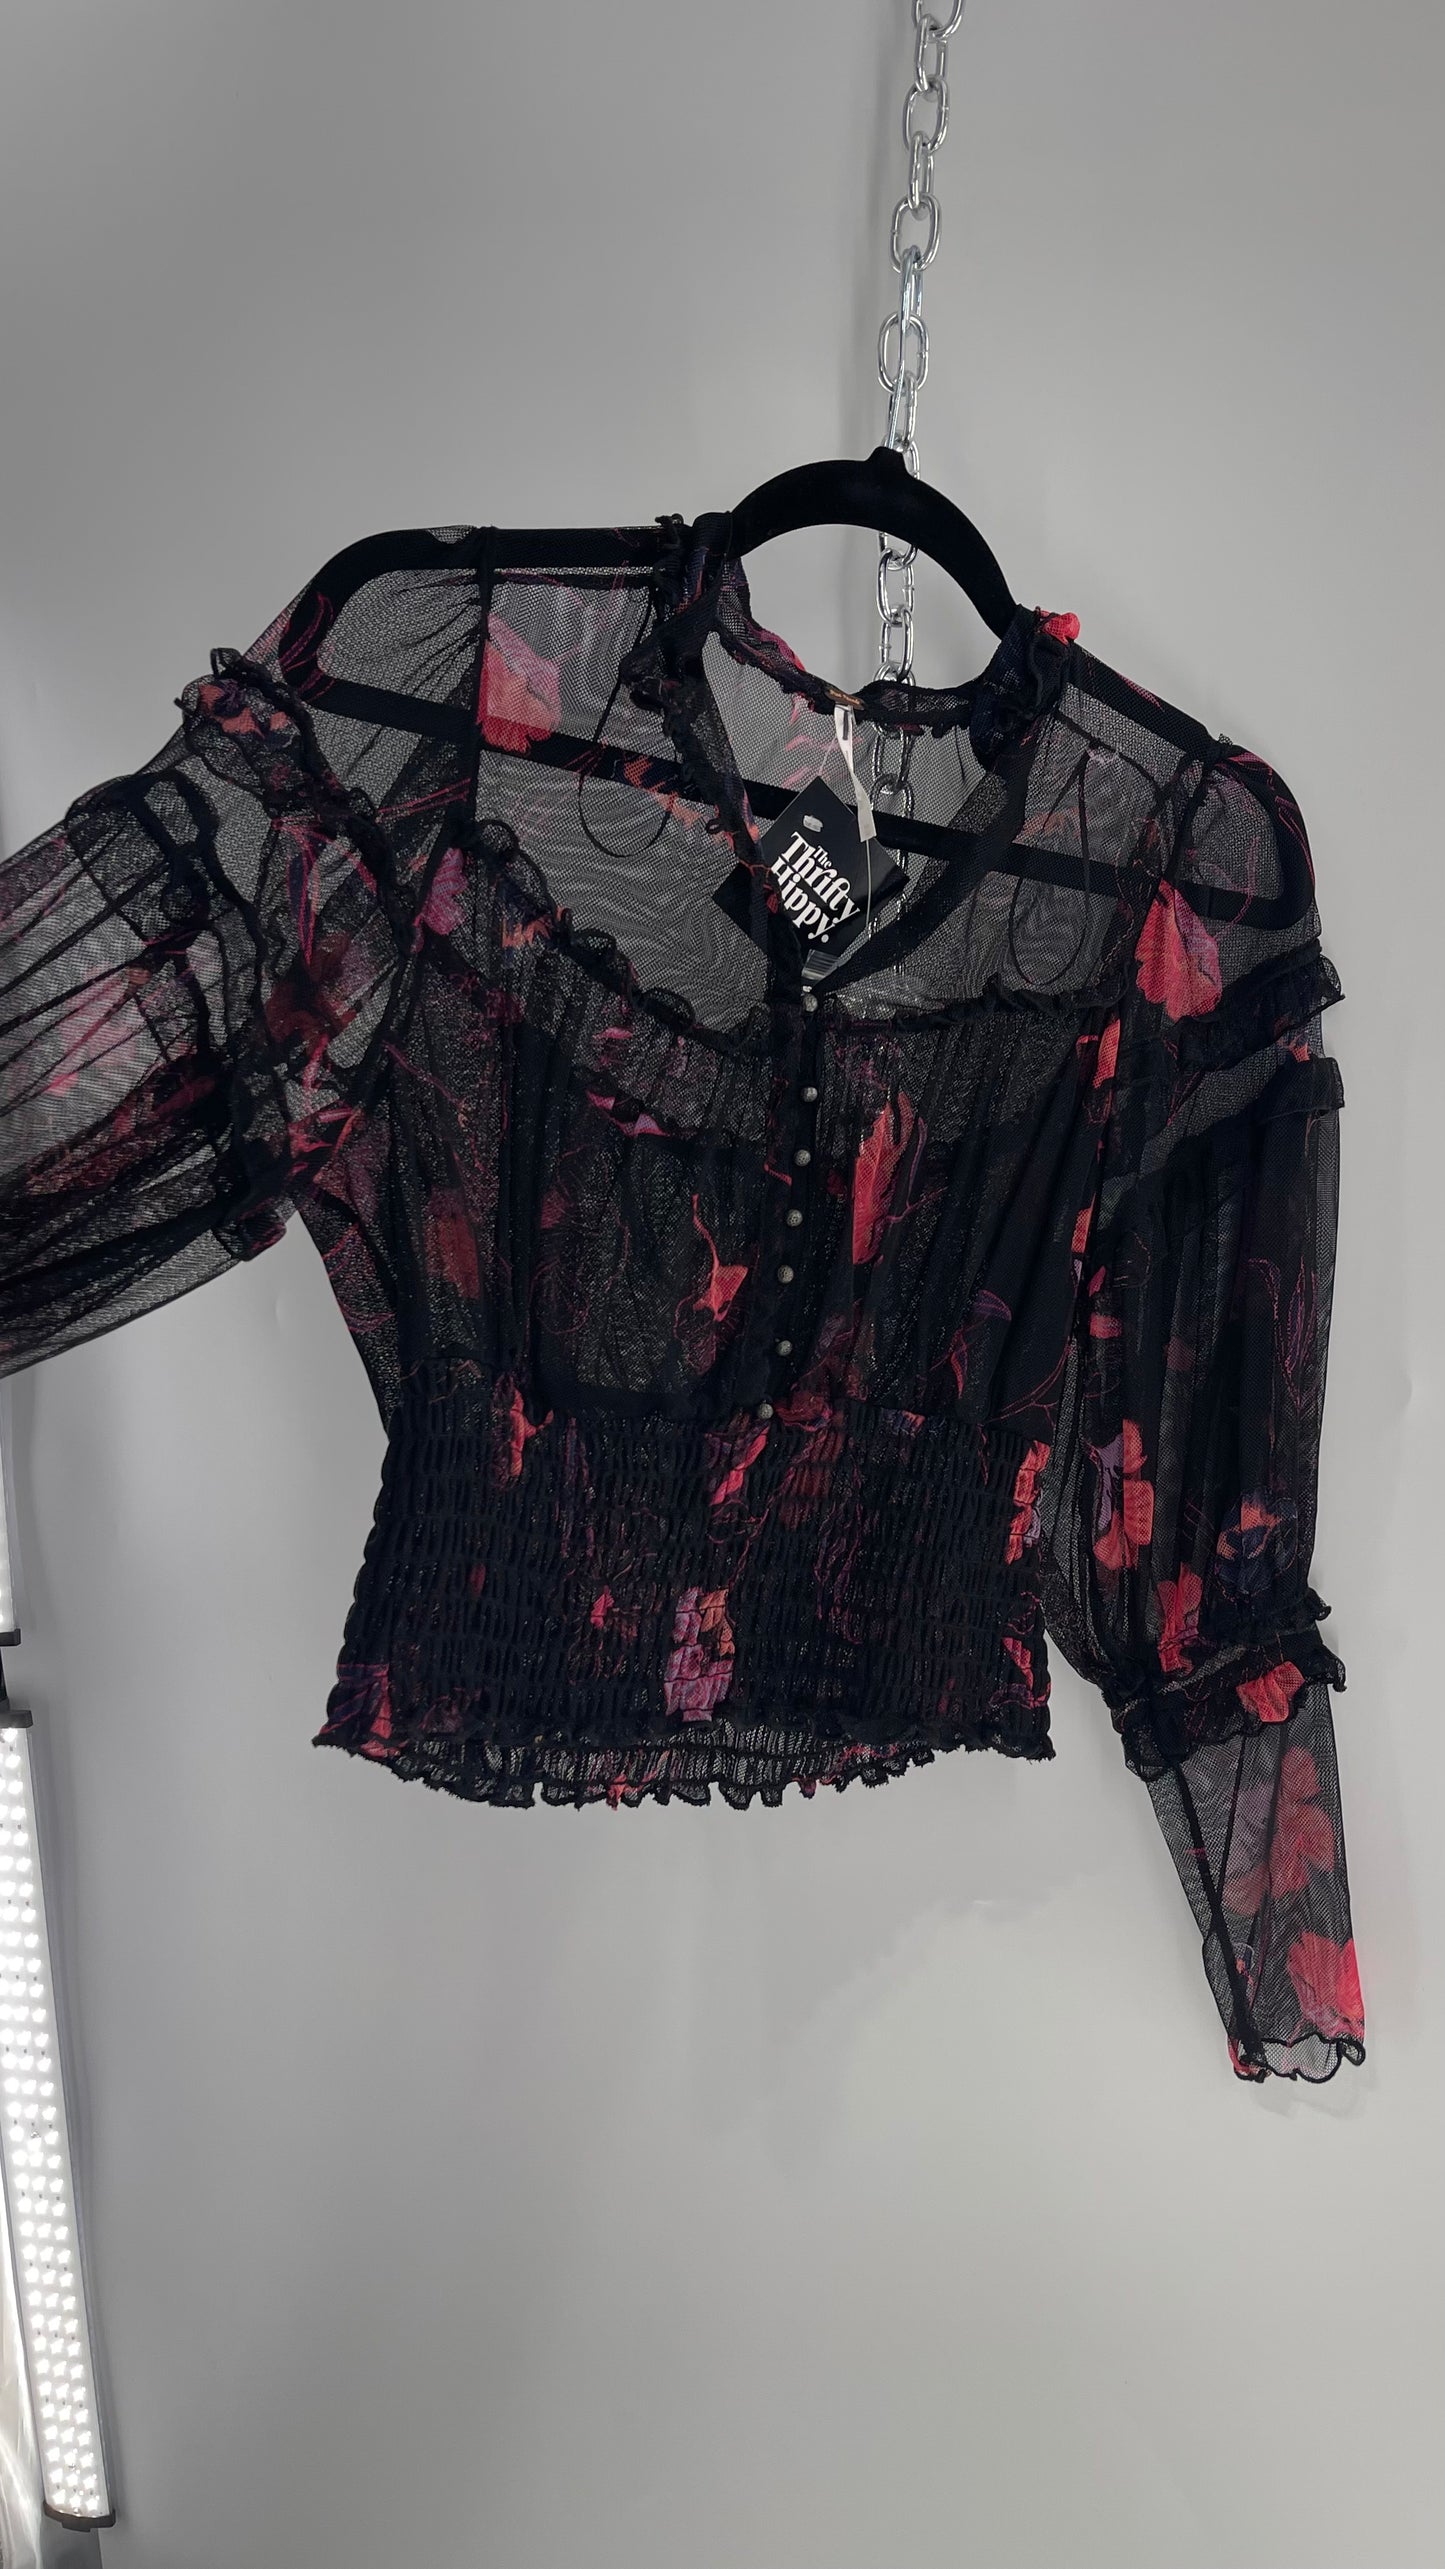 Free People Black Mesh Top with Smocked Waist, Buttoning and Contrasting Florals (Medium)